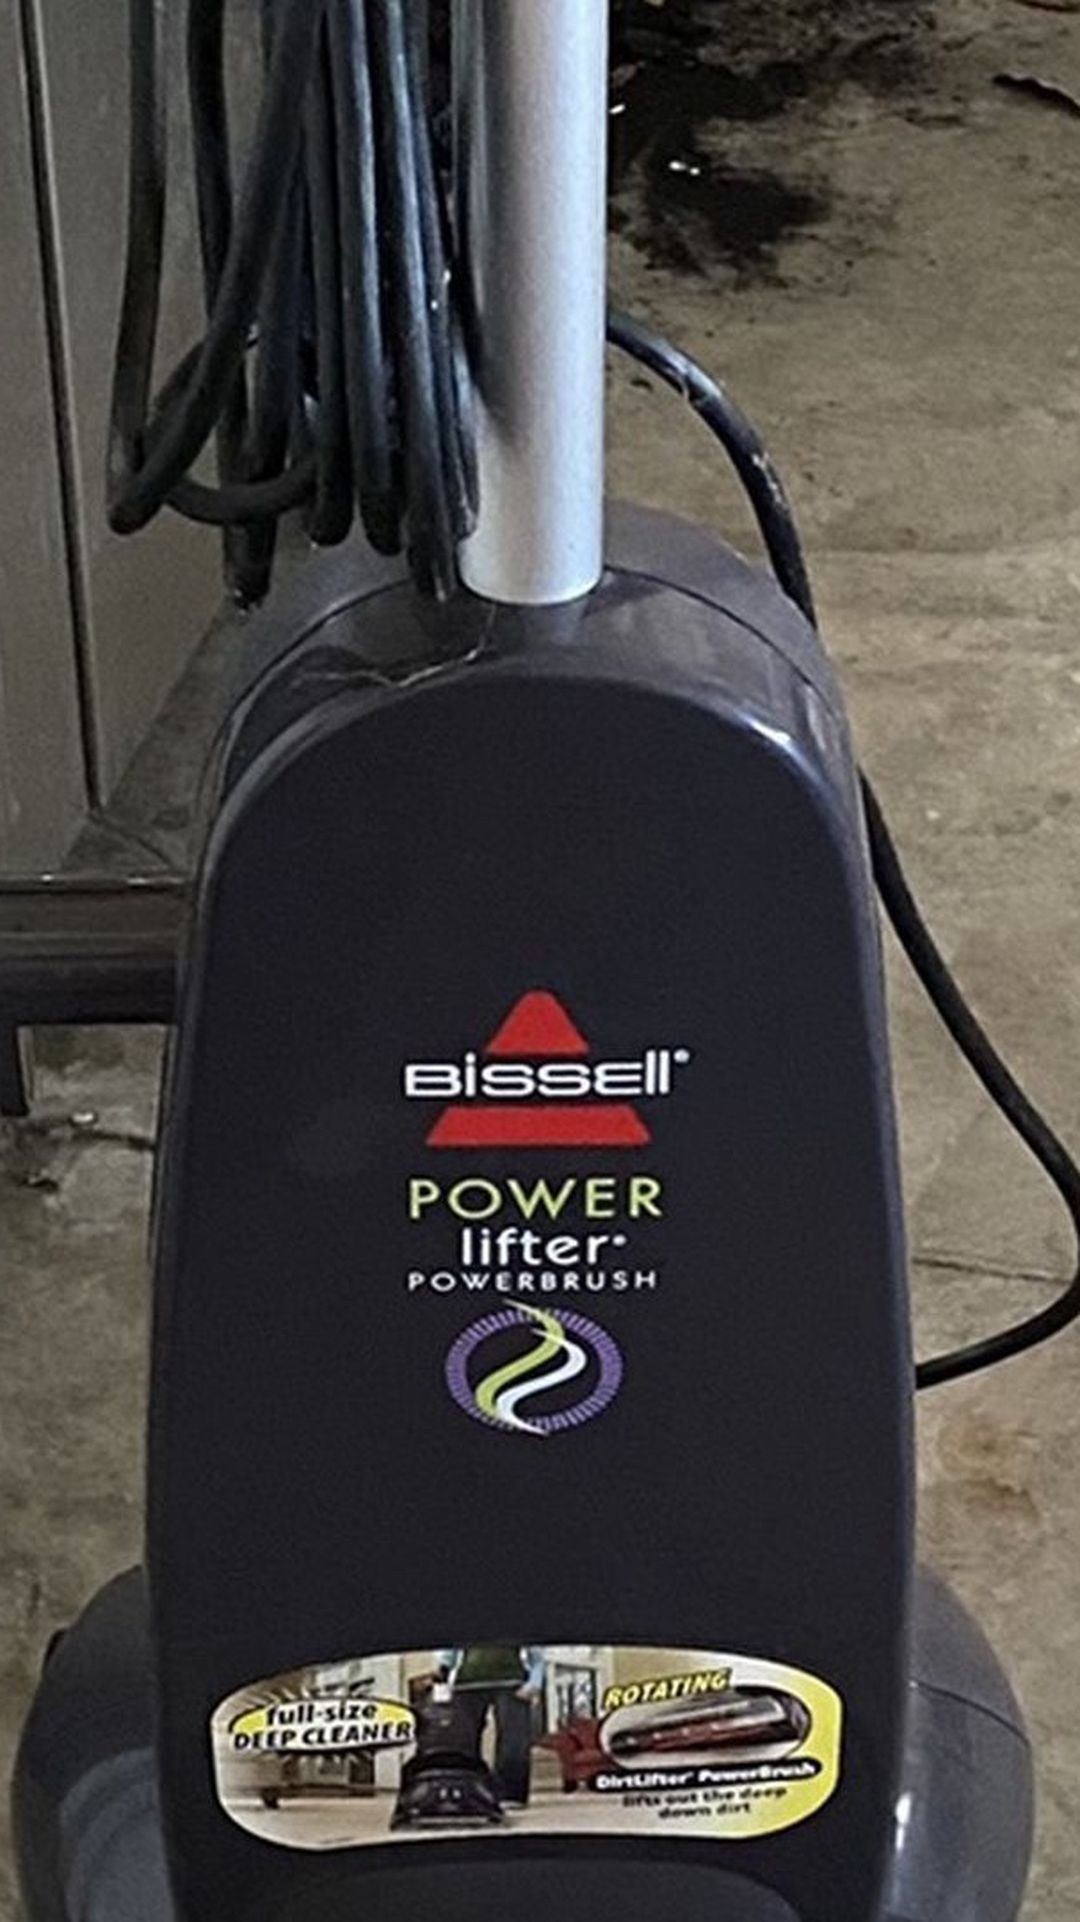 Brand New Never Used Bissell Power Lifter Powerbrush